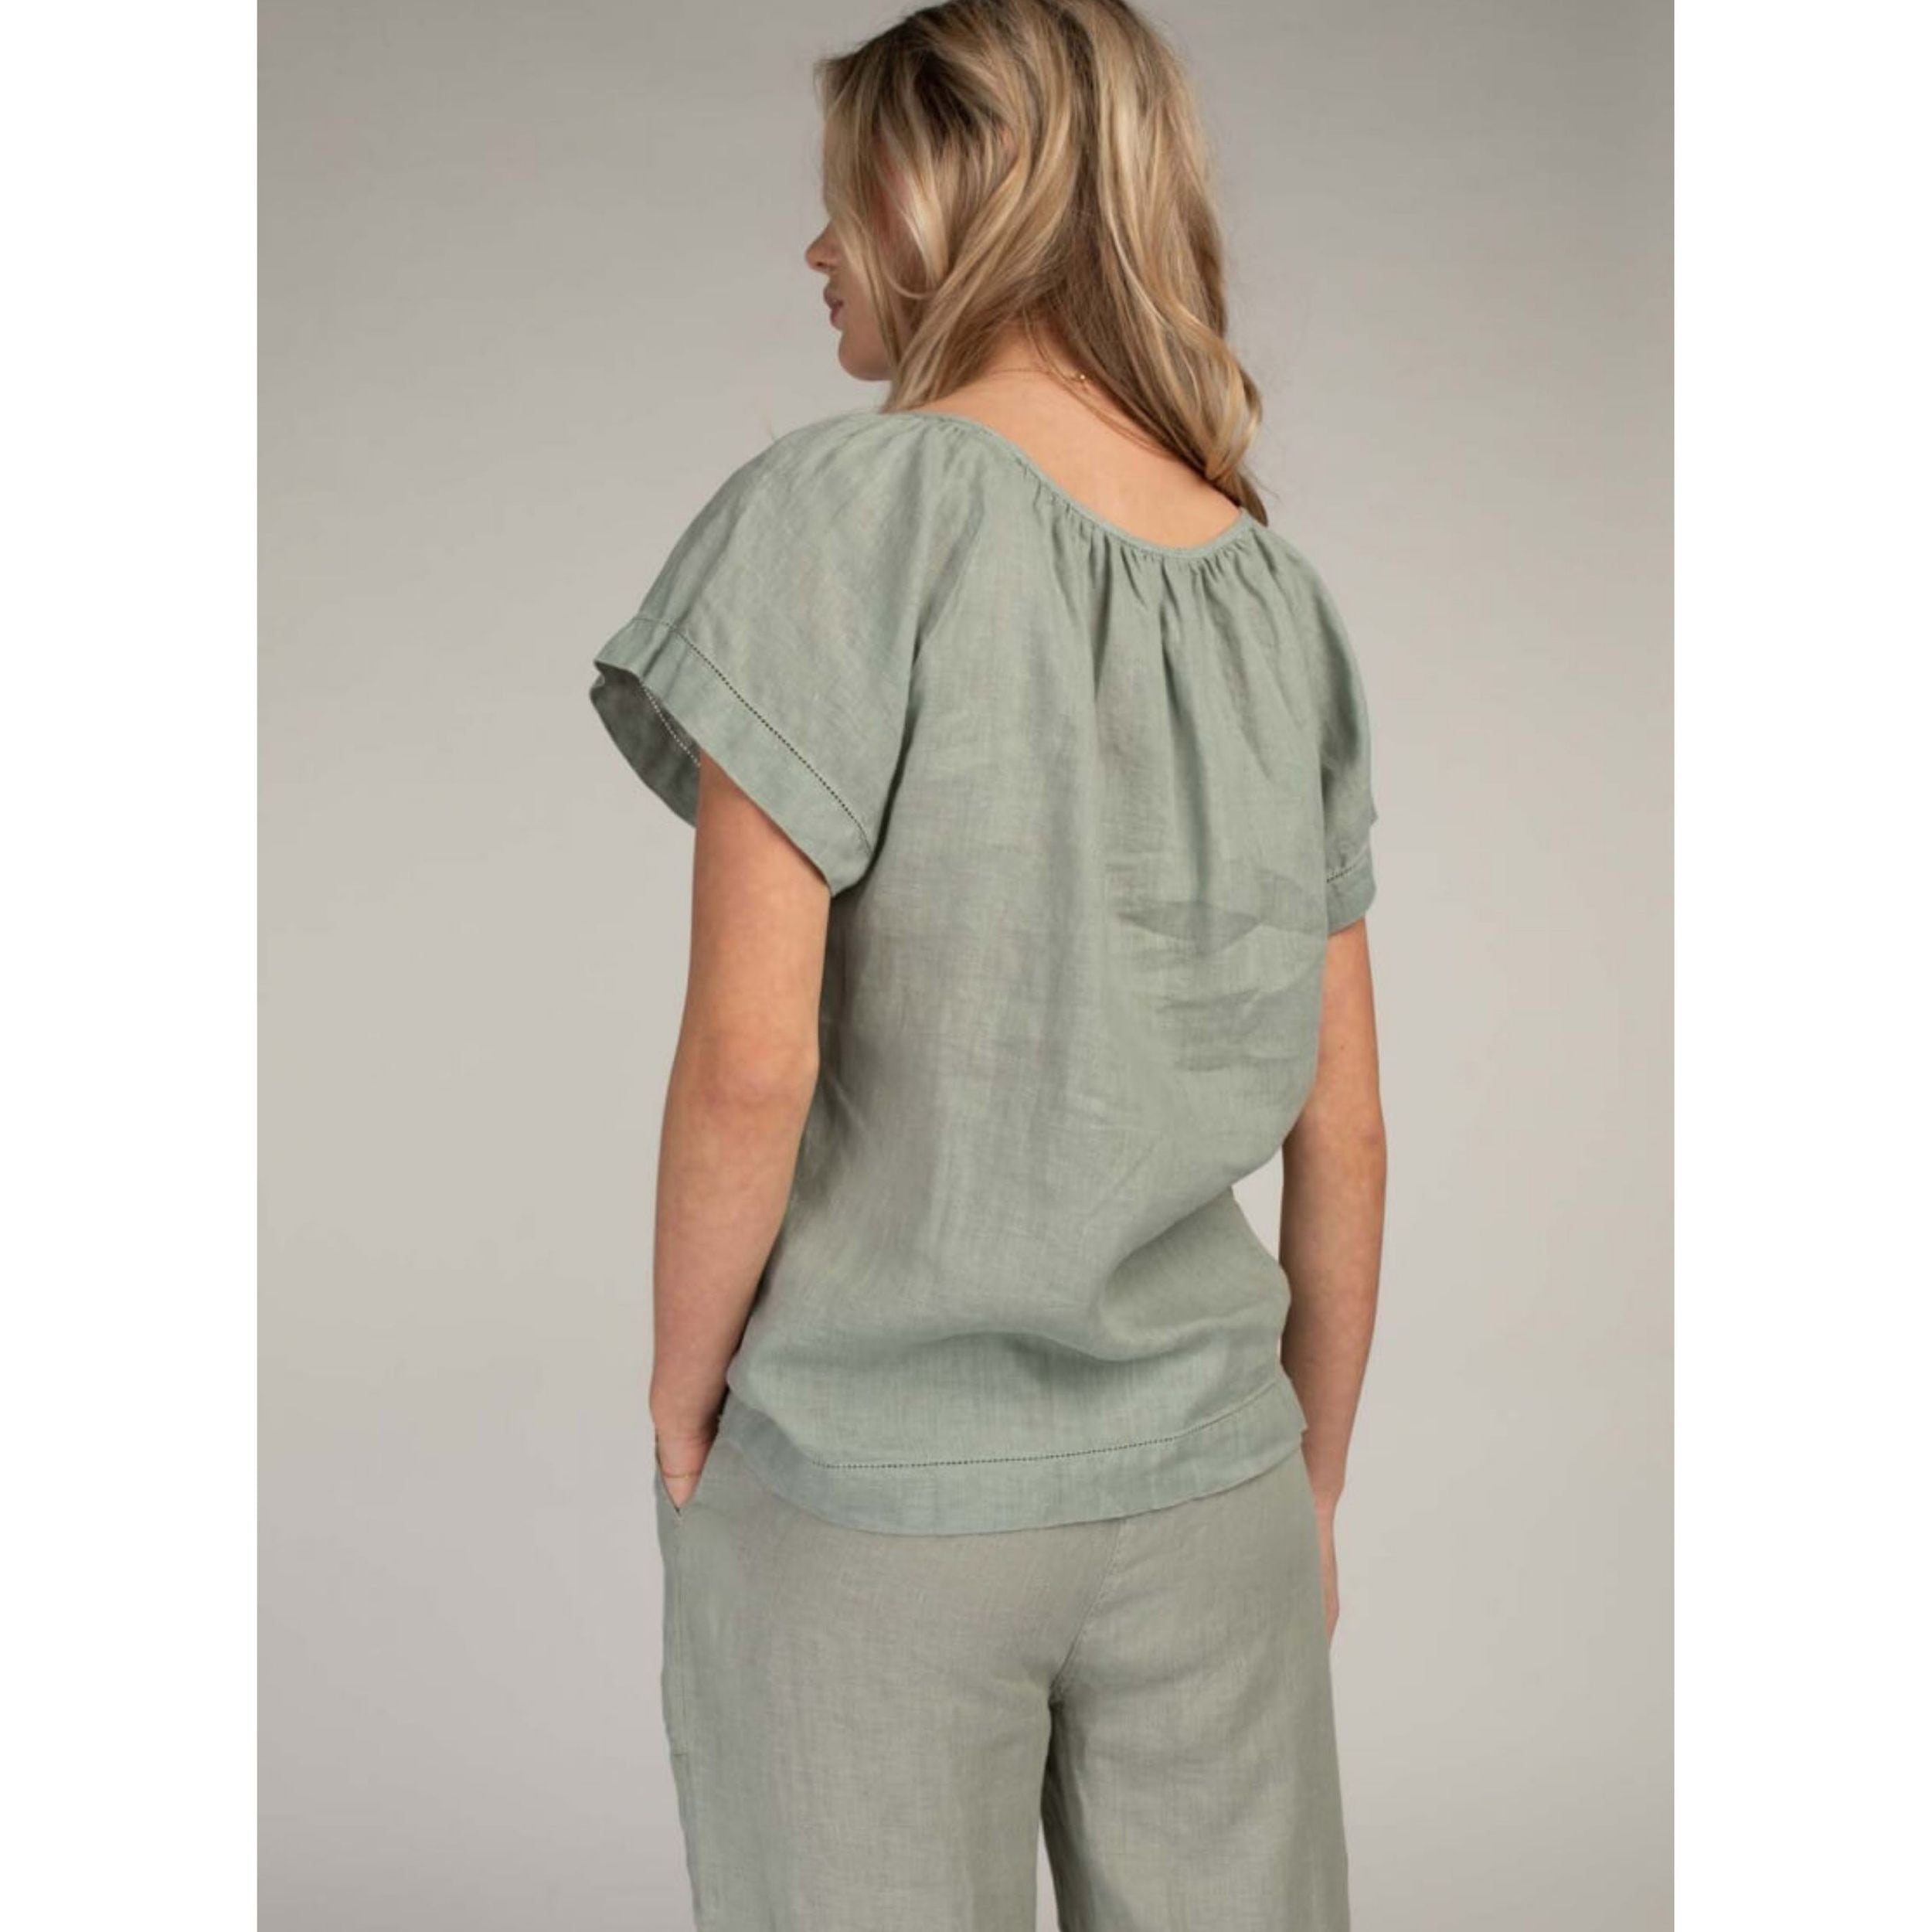 Moscow Design Bluse Teal Solid "Teresa"